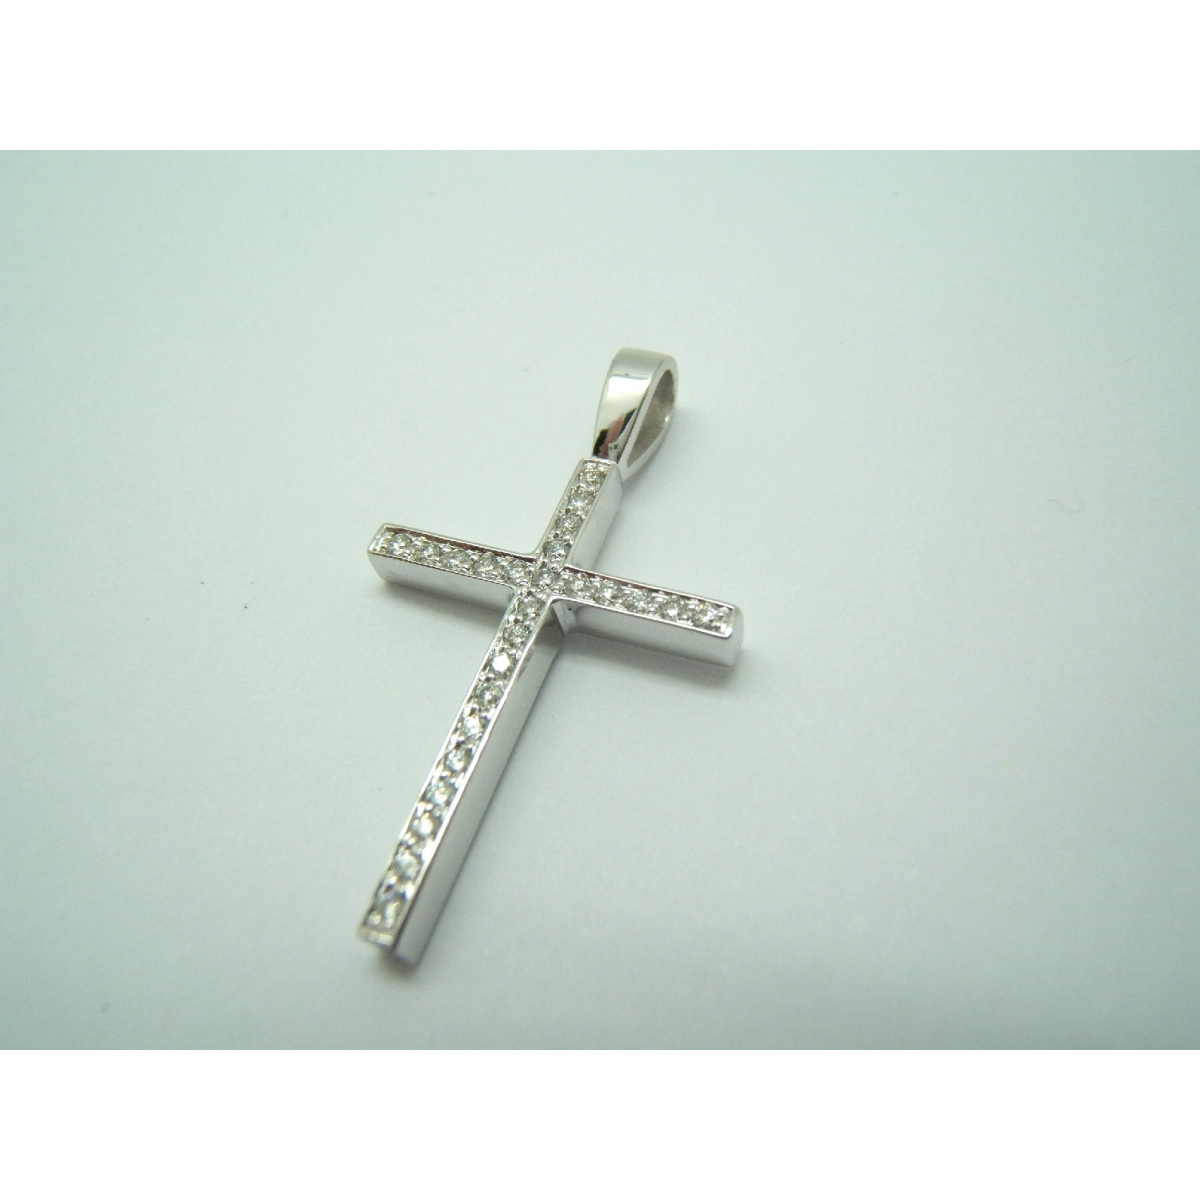 NECKLACE CROSS WHITE GOLD AND DIAMONDS B-79 C-186